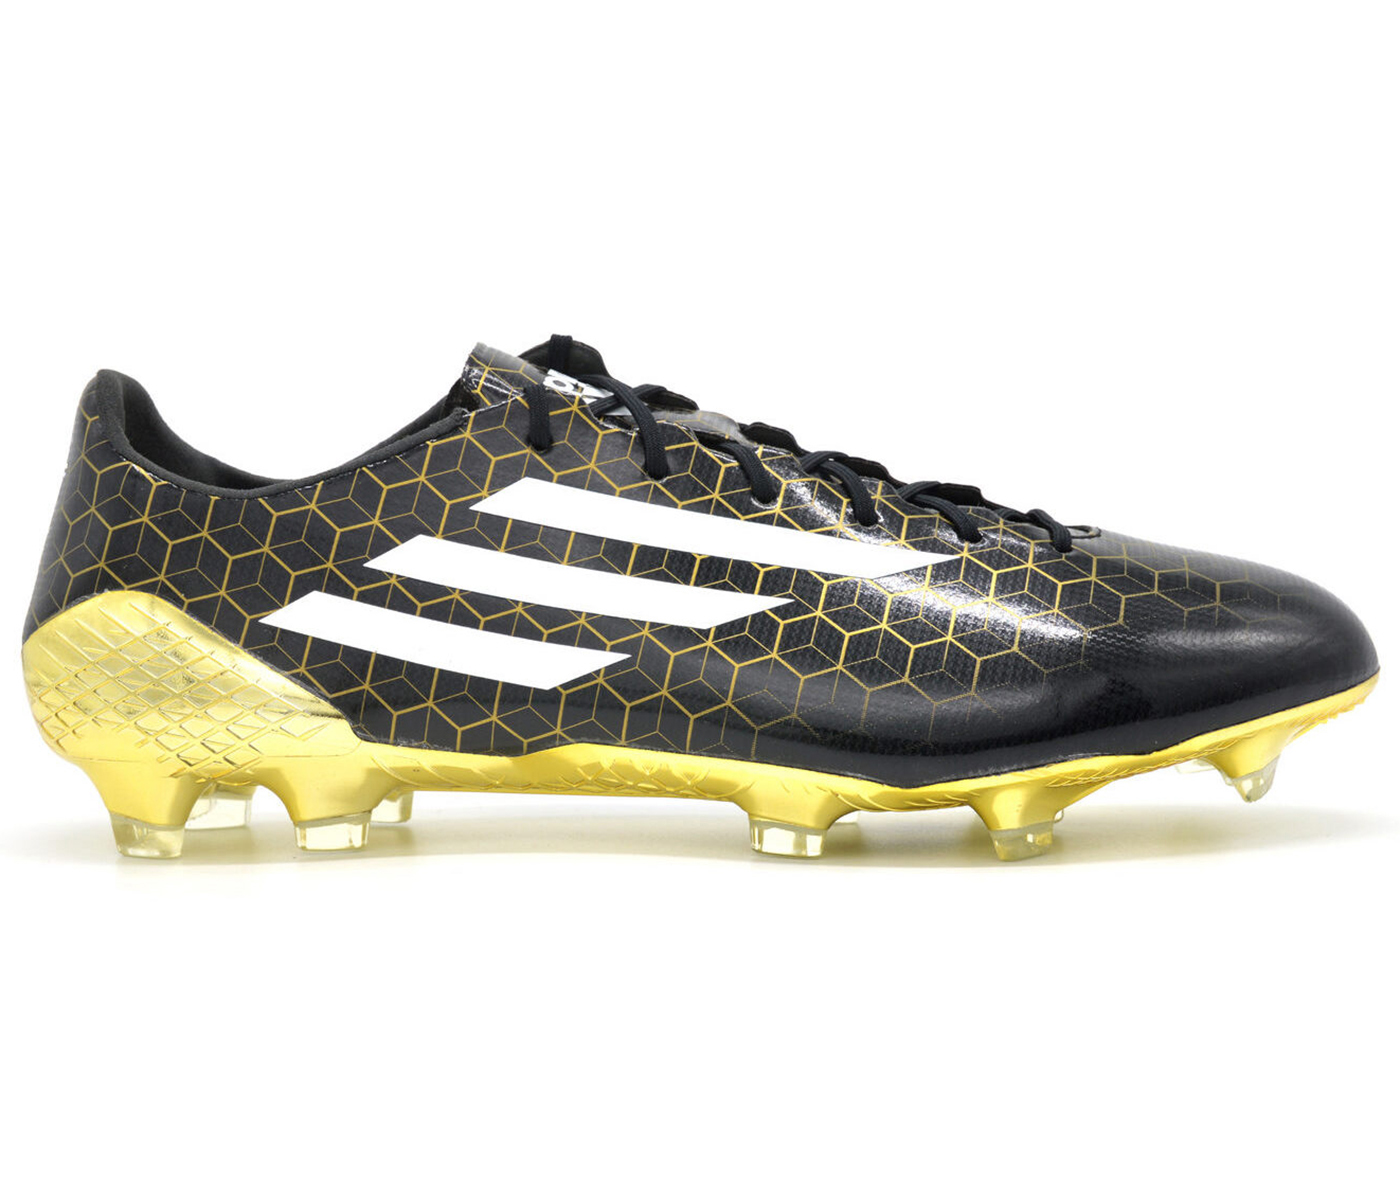 adidas F50 Ghosted UCL FG Silver Metallic メンズ - GV7677 - JP